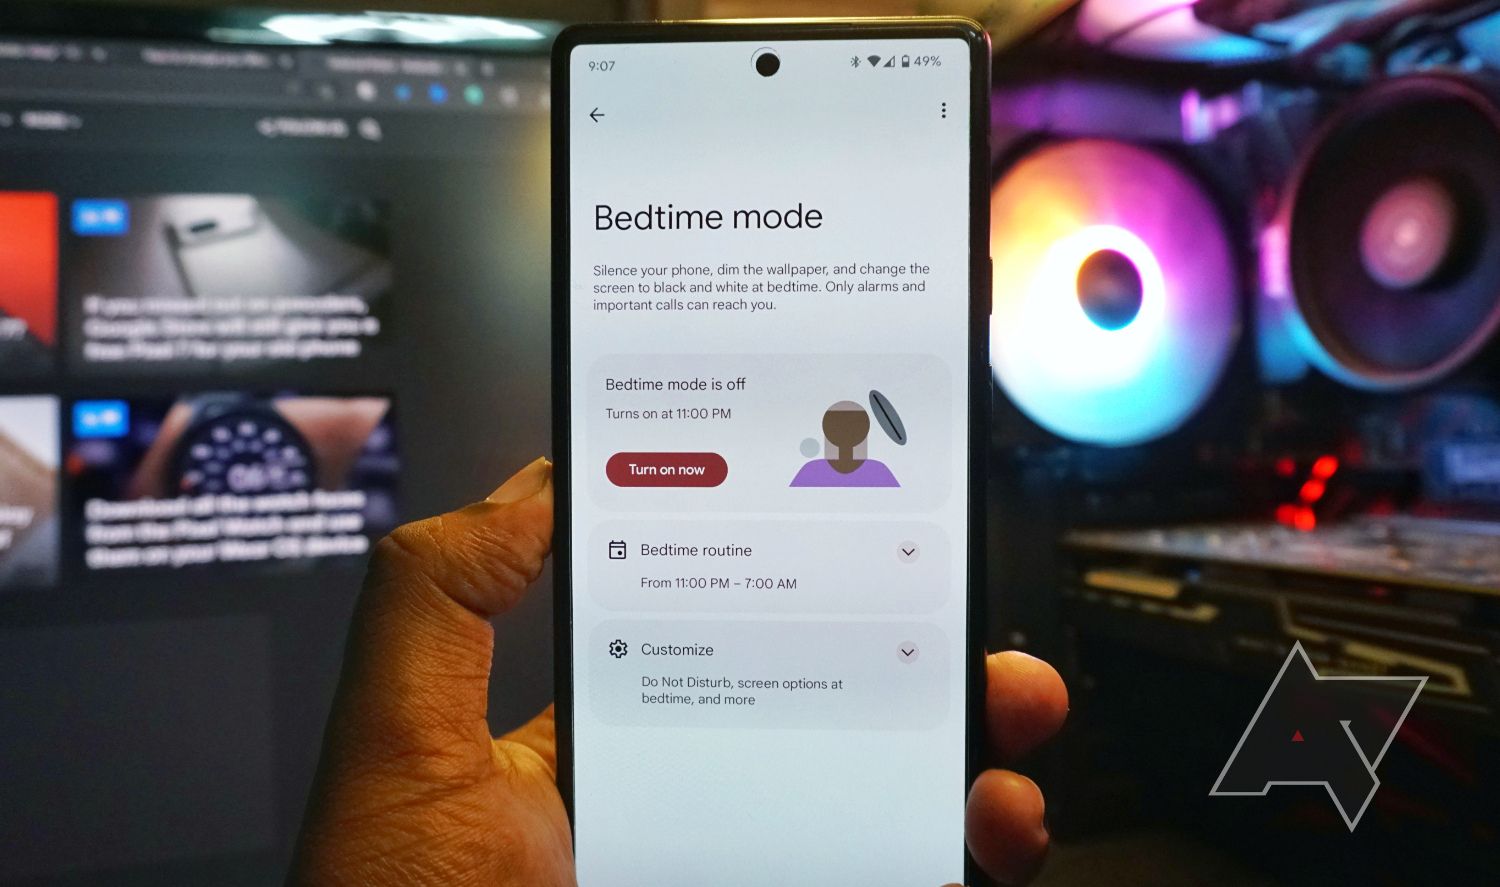 An Android phone showing Bedtime mode